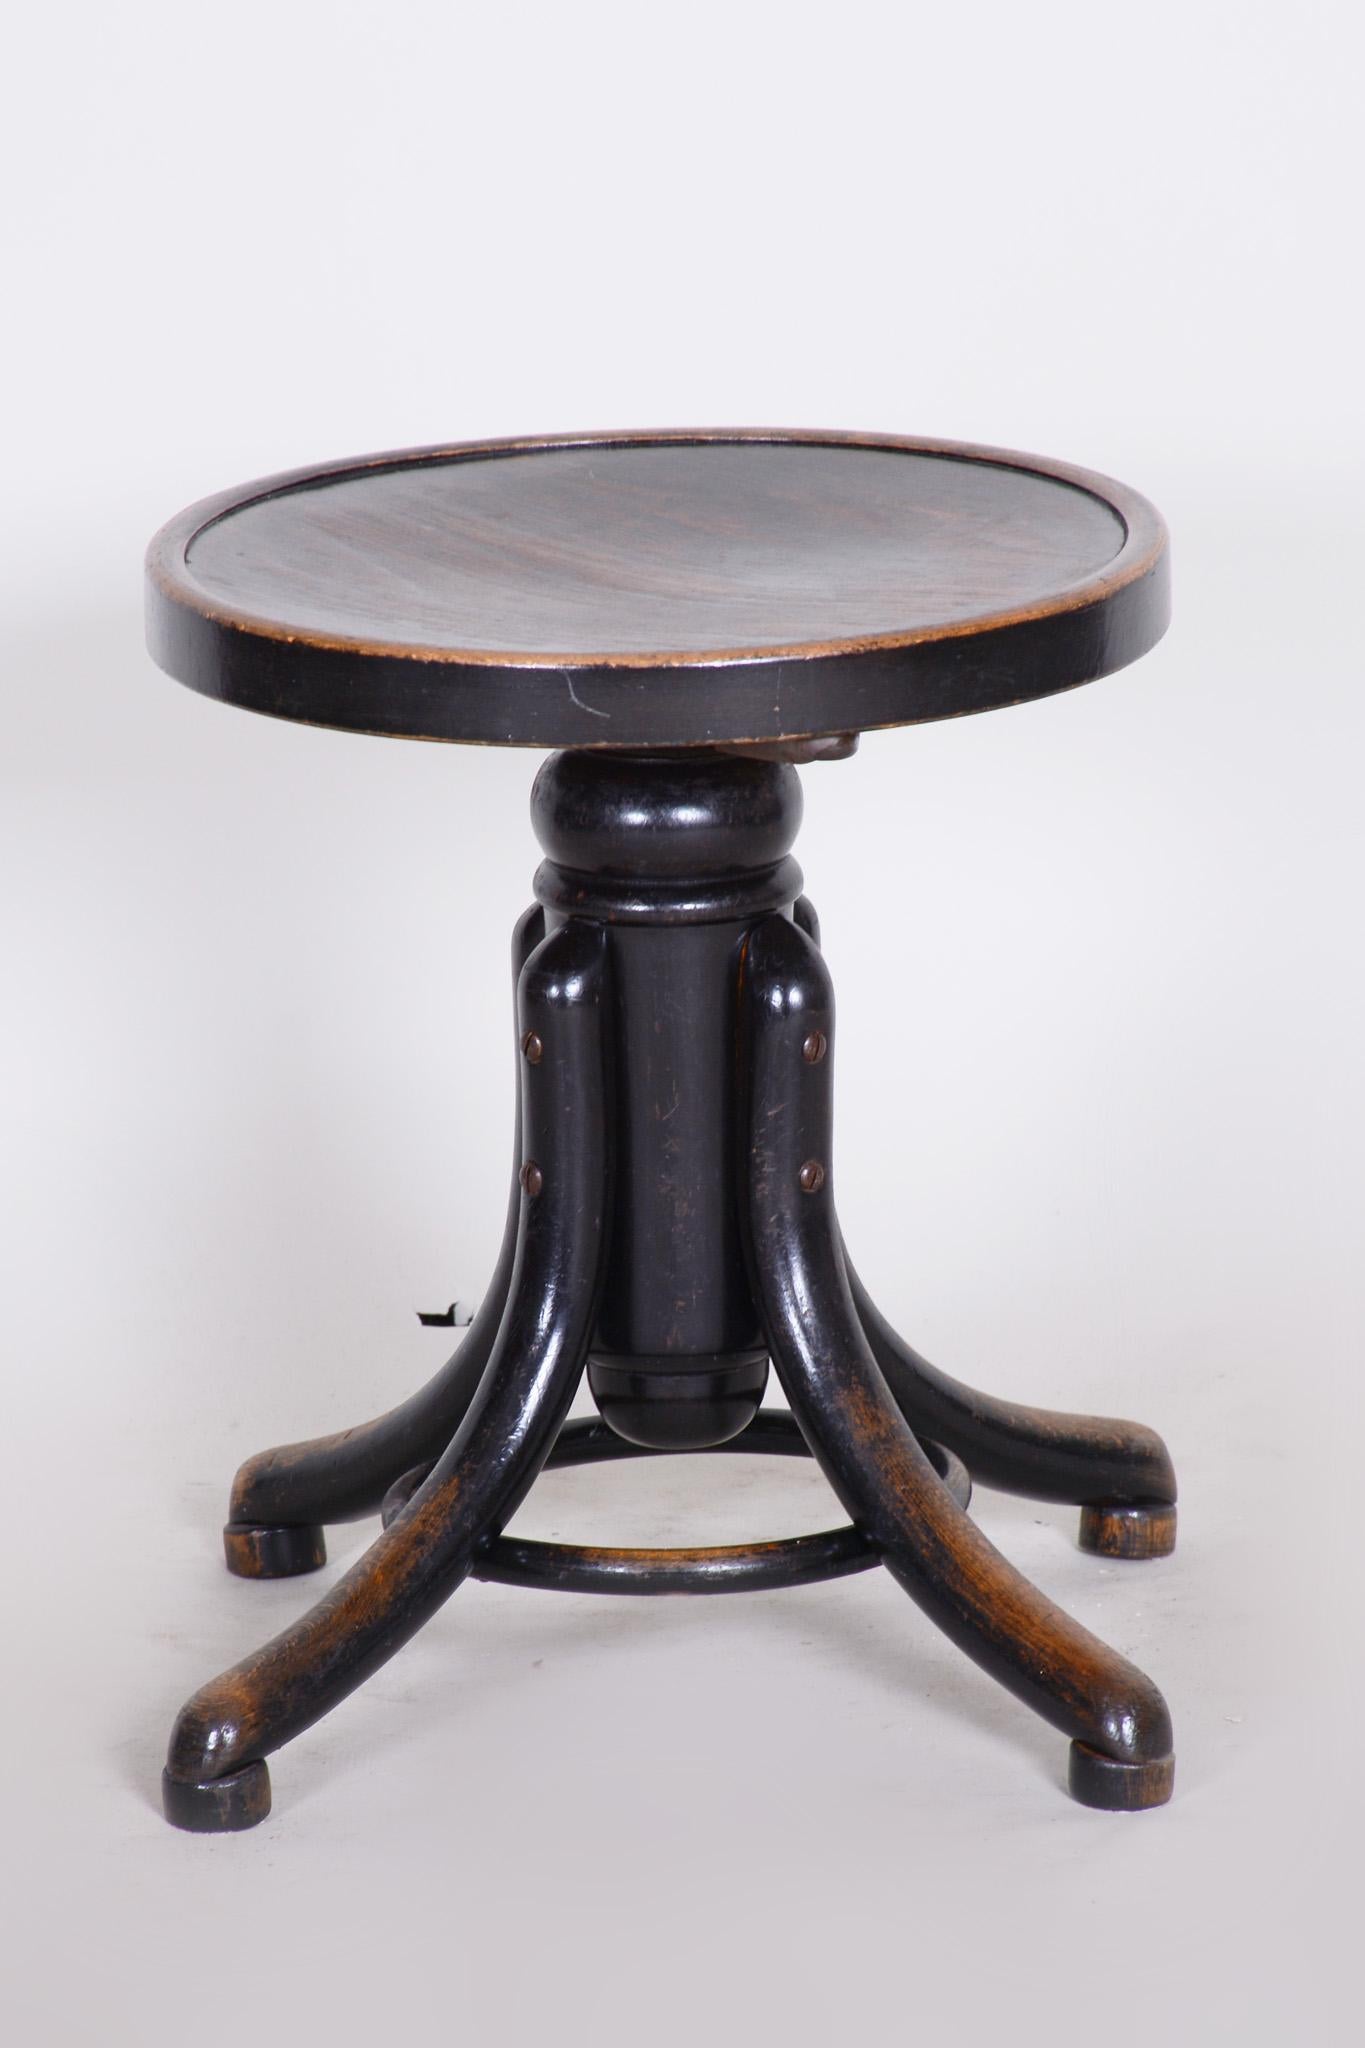 Small round Art Deco piano chair.
Material: Beech
Maker: Thonet
Source: Czechia
Period: 1920-1929

Measures: Maximal height 63 cm (24.80 in)
Minimal height 45 cm (17.72 in)
Overall width 35 cm (13.78 in)
Seat width 31 cm (12.20